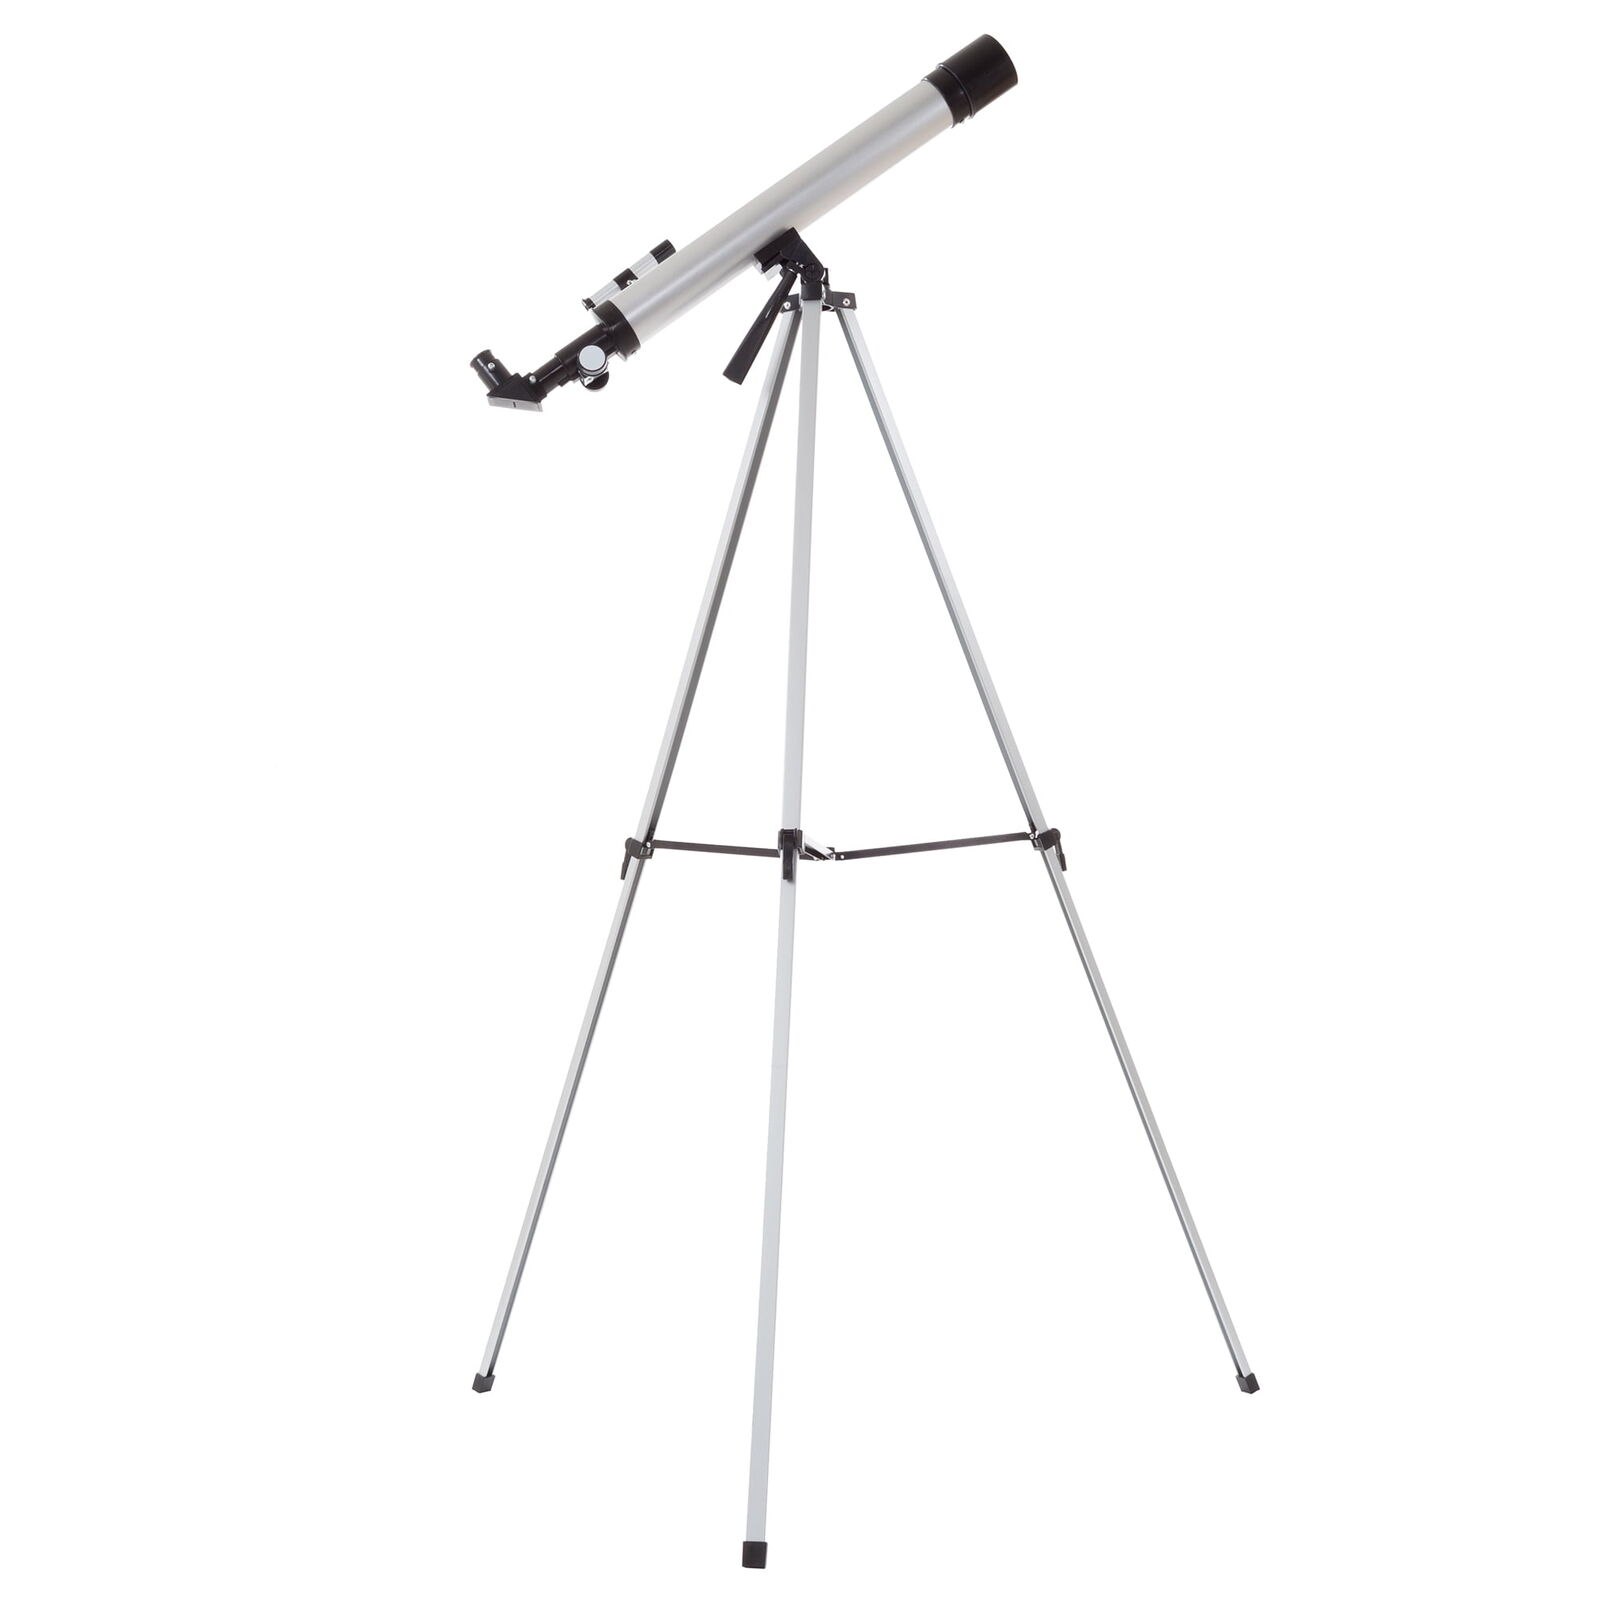 60mm Mirror Refractor Beginner Telescope for Kids and Adults